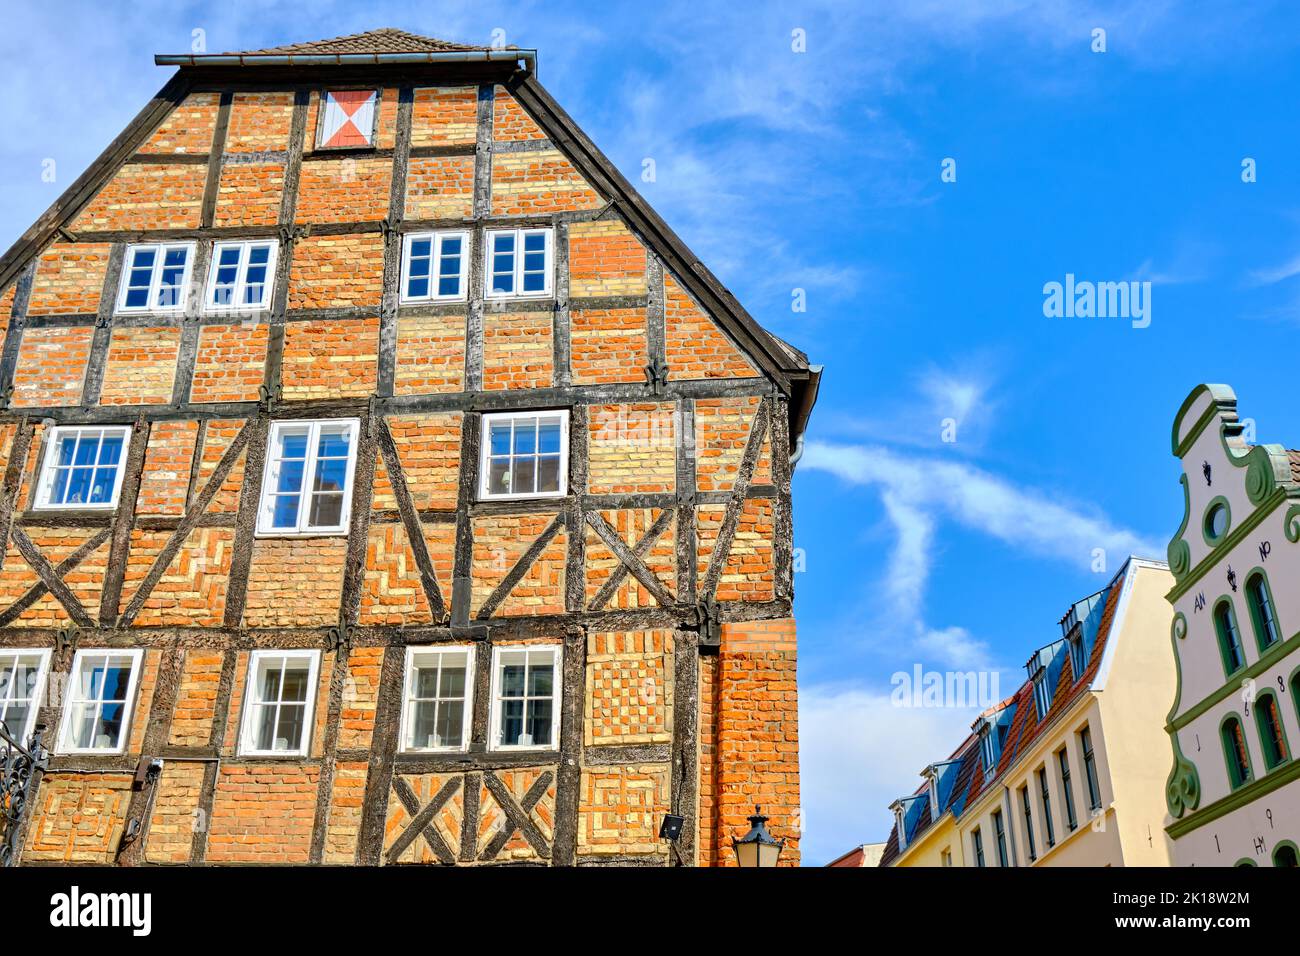 Brauhaus am Lohberg (Brewery at Lohberg), a listed medieval half-timbered building and former warehouse from 1452, Wismar, Germany. Stock Photo